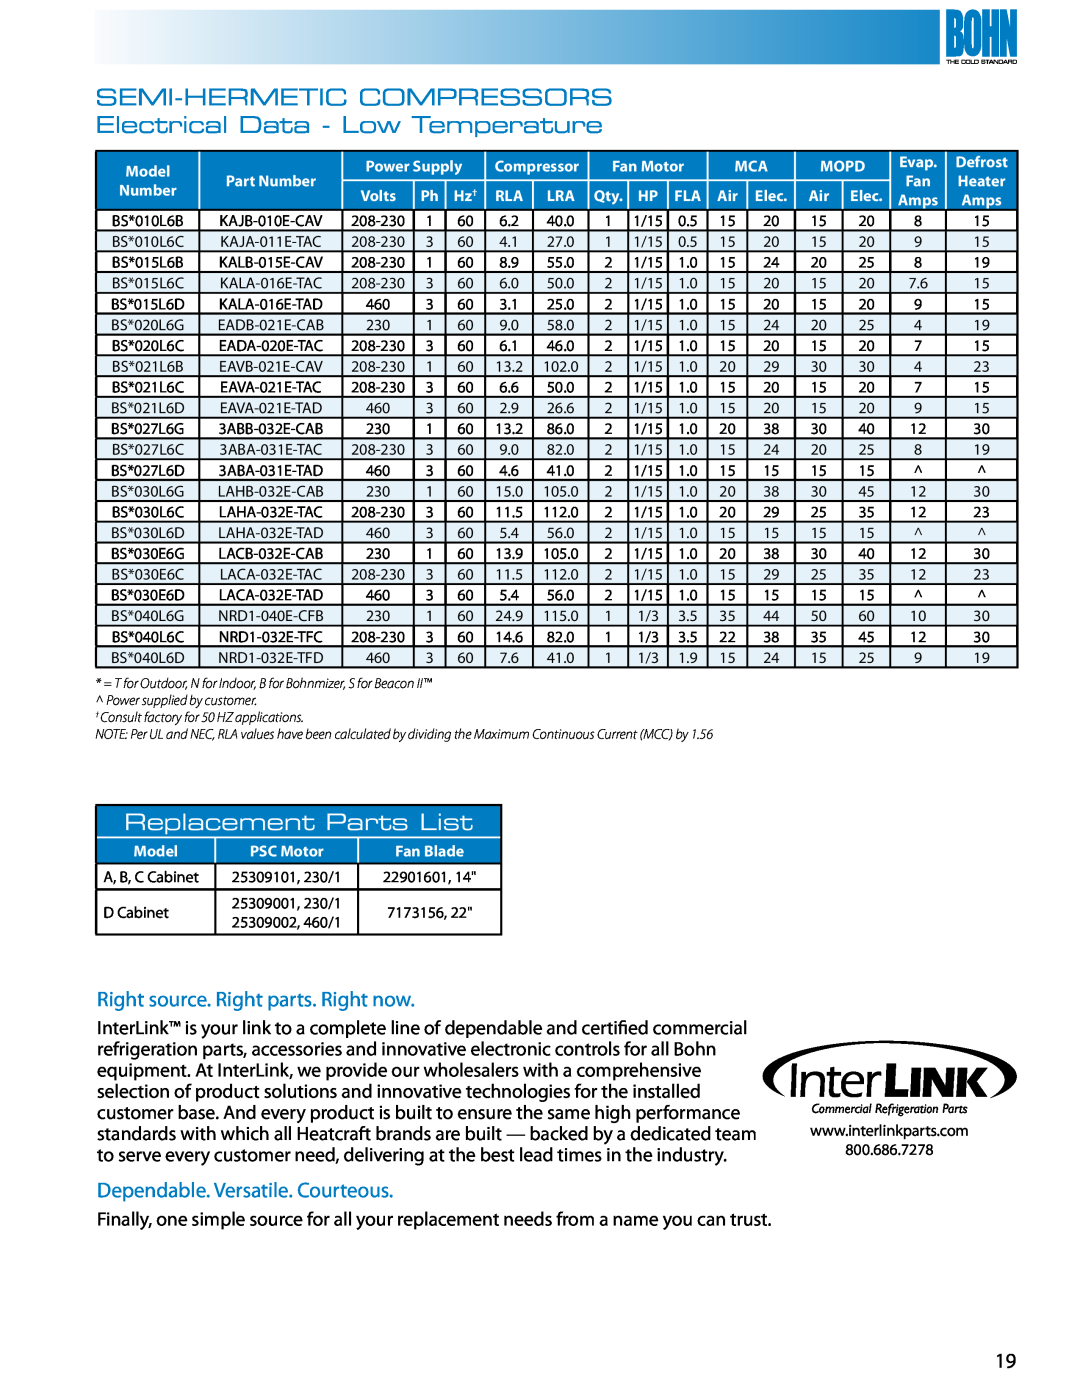 Heatcraft Refrigeration Products Air-Cooled Condensing Units Electrical Data - Low Temperature, Semi-Hermeticcompressors 